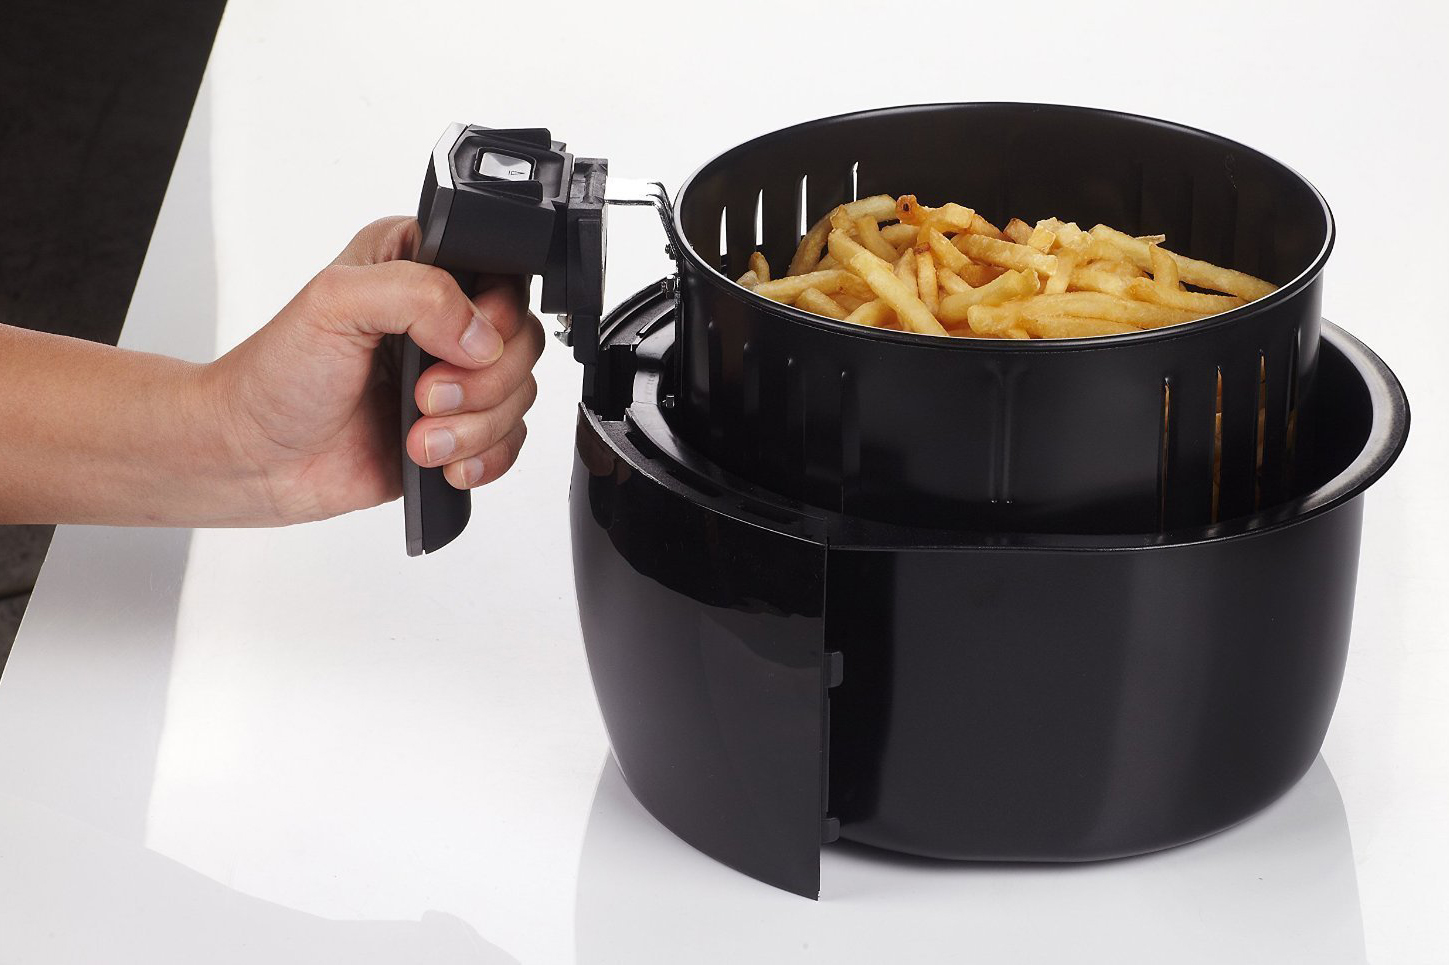 https://www.digitaltrends.com/wp-content/uploads/2017/11/Gowise-Electric-Air-Fryer-Thumb.jpg?fit=720%2C720&p=1